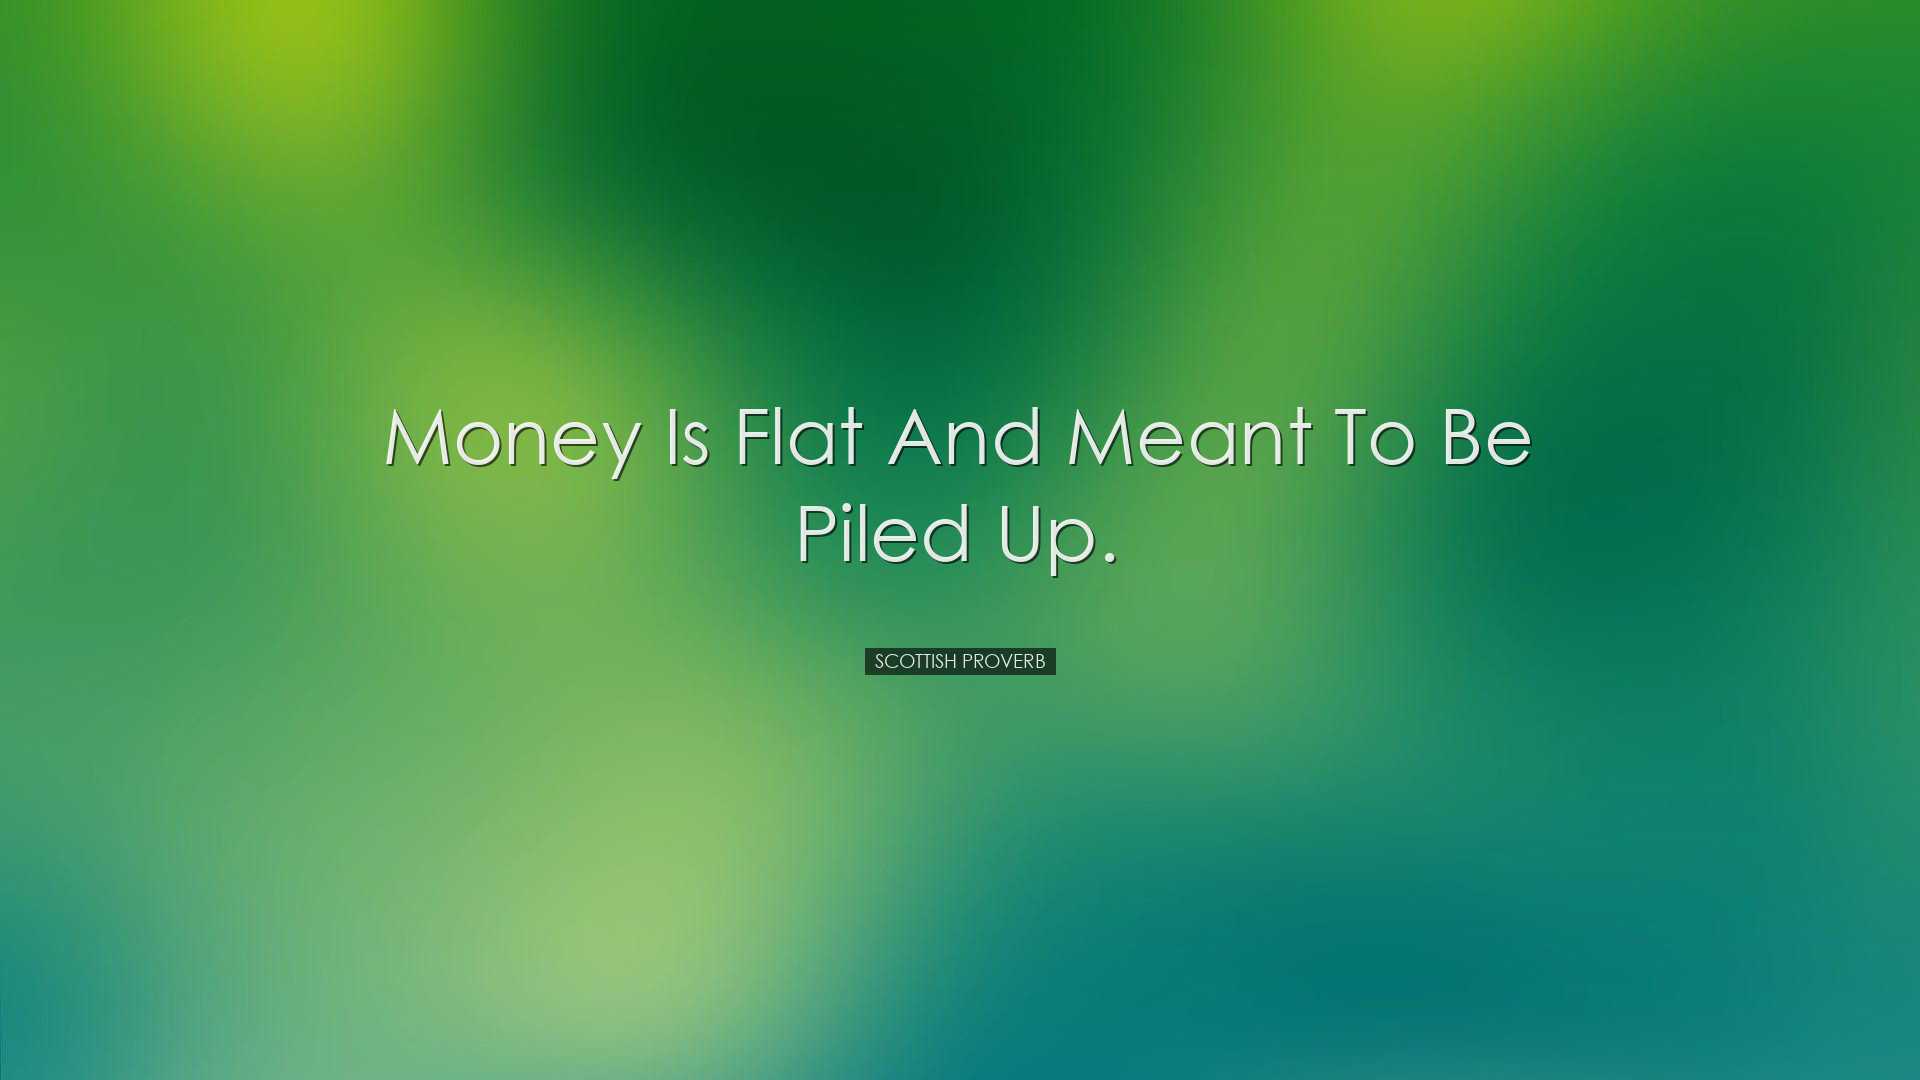 Money is flat and meant to be piled up. - Scottish Proverb